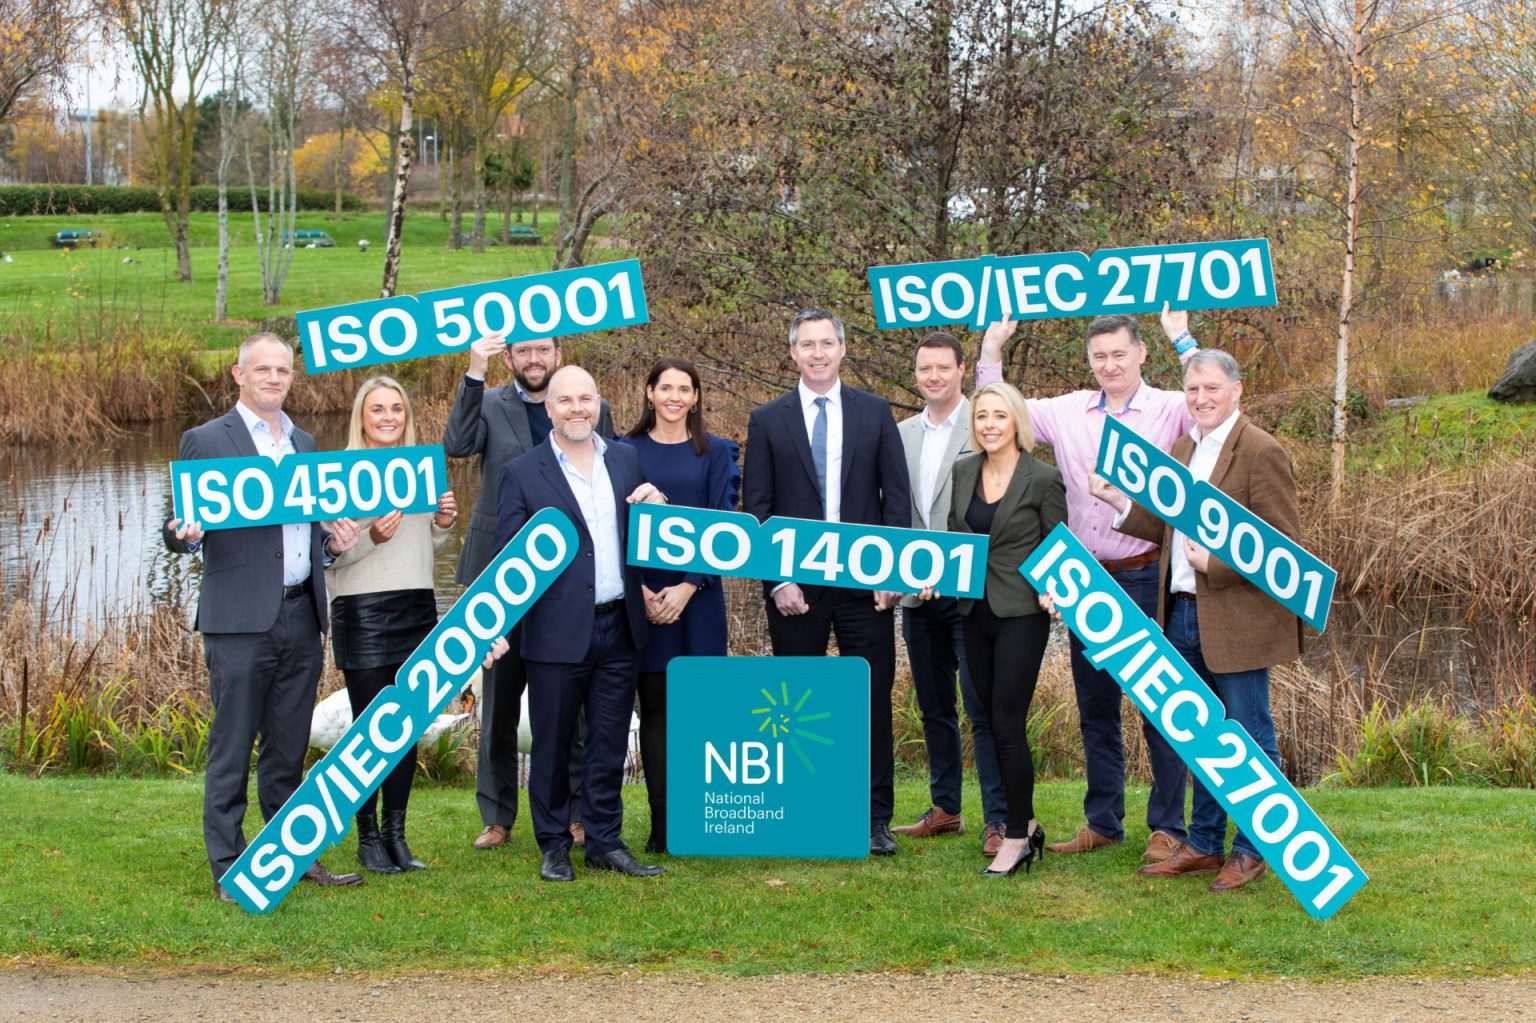 New quality standard achieved by National Broadband Ireland is 7th ISO certification in 2 years